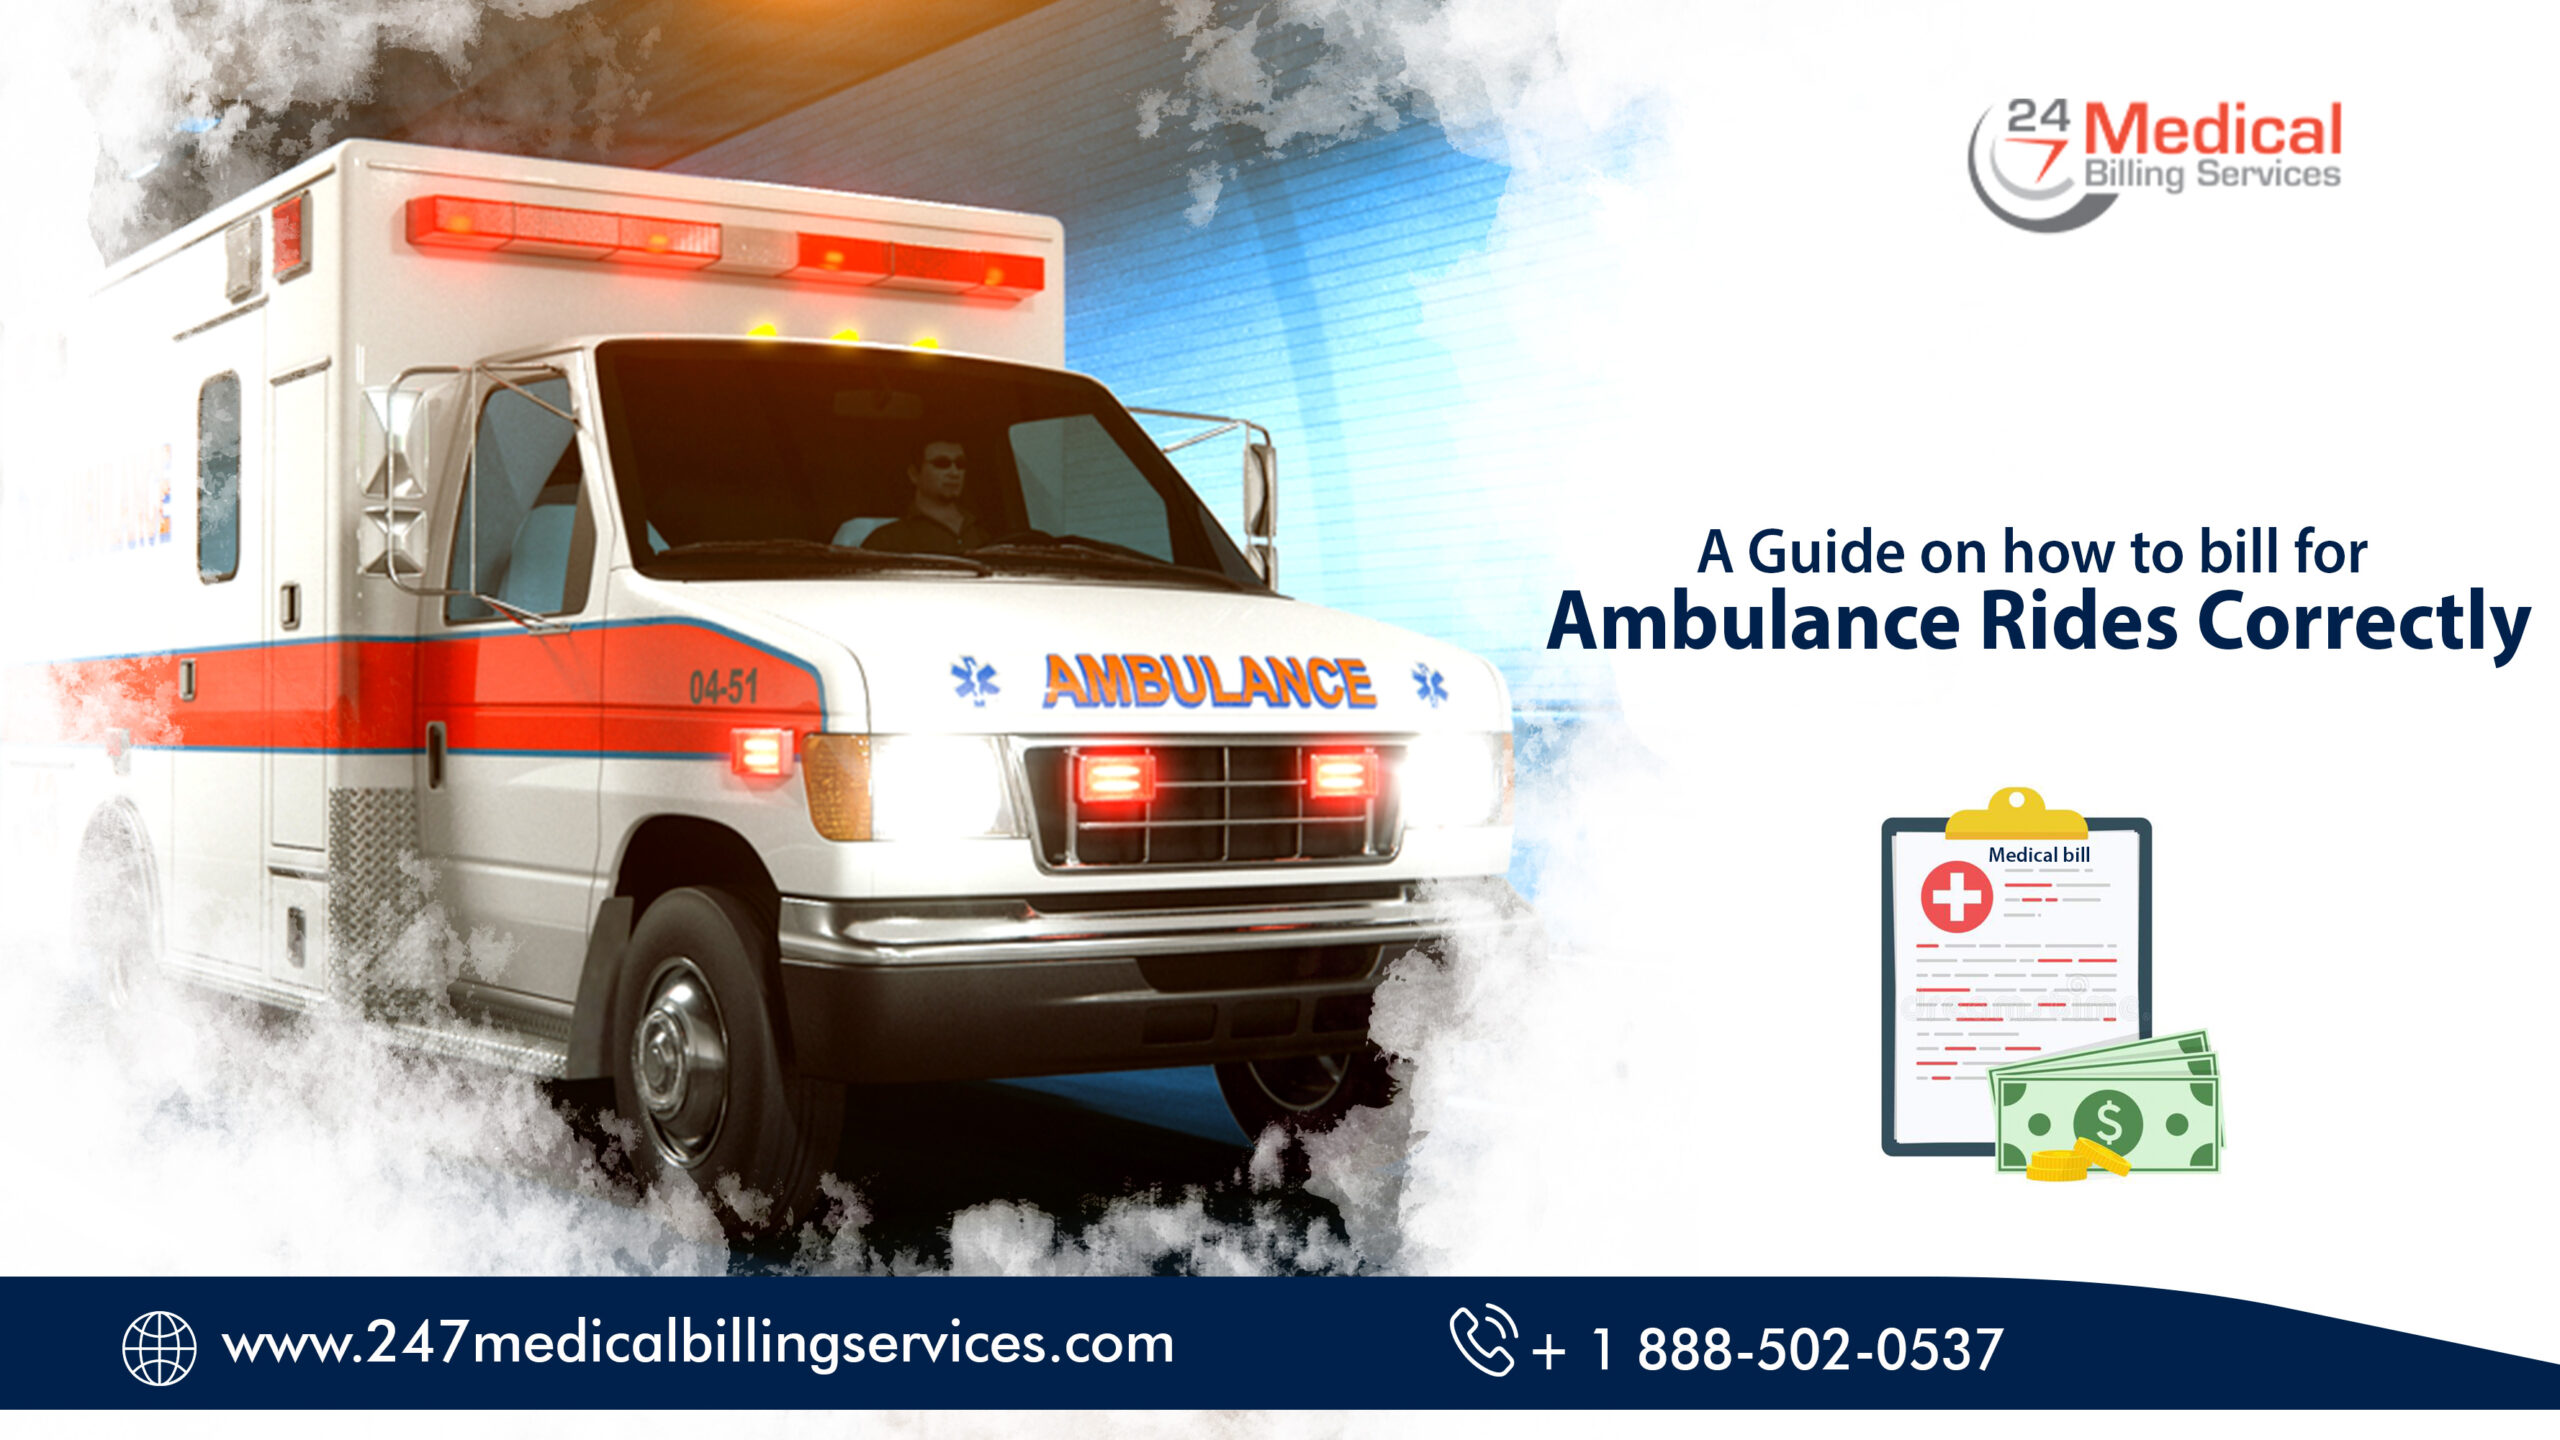  A Guide on How to Bill for Ambulance Rides Correctly